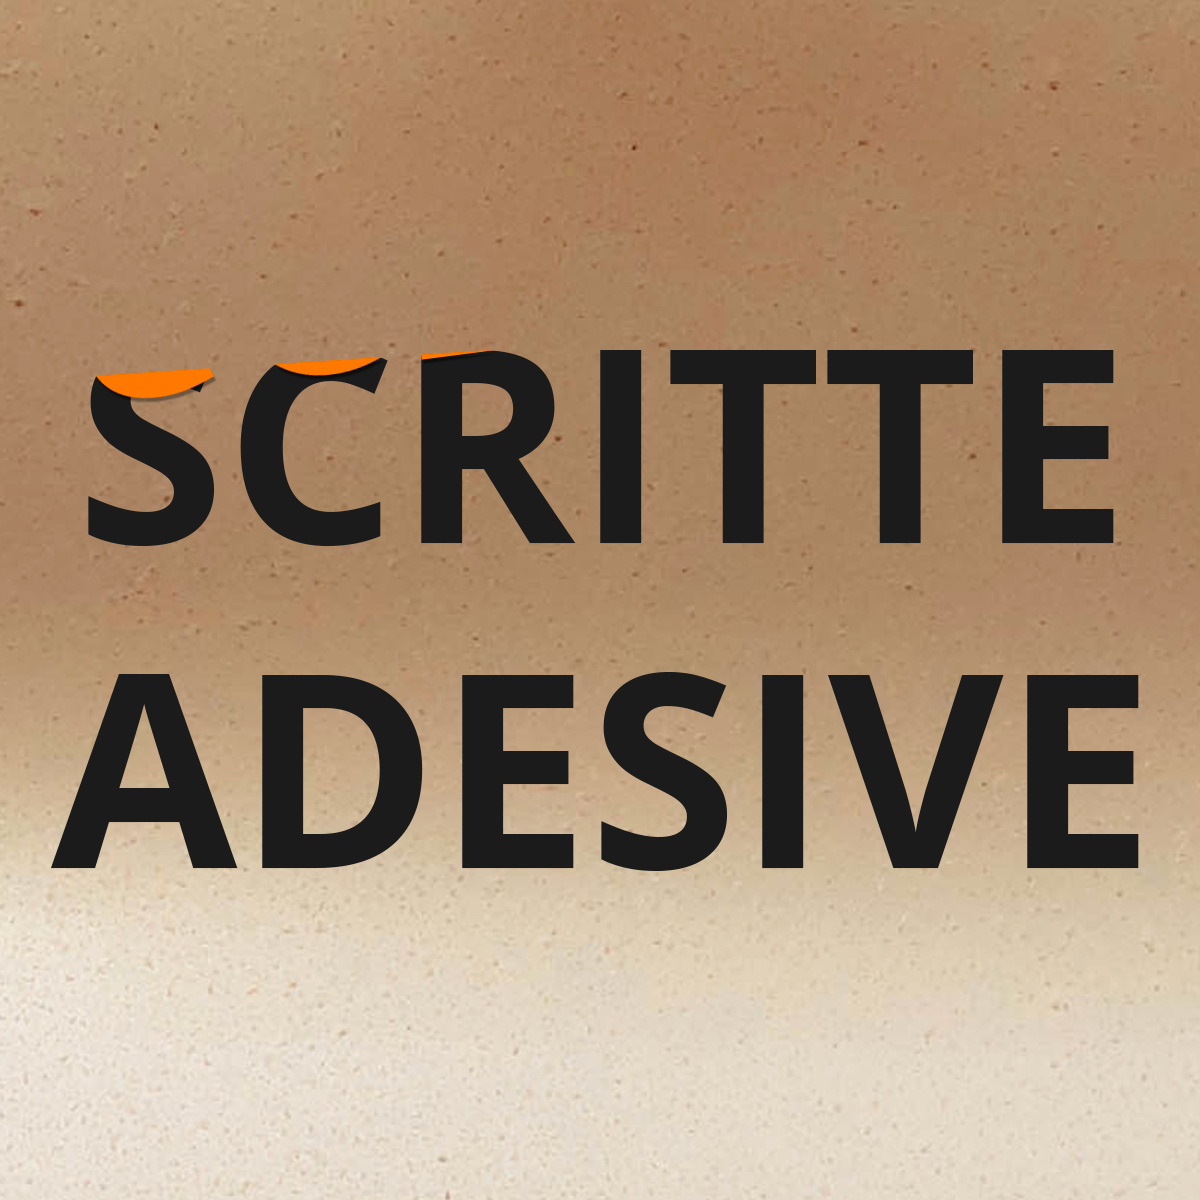 https://customcolor.it/wp-content/uploads/2018/01/scritte-adesive-cover.png